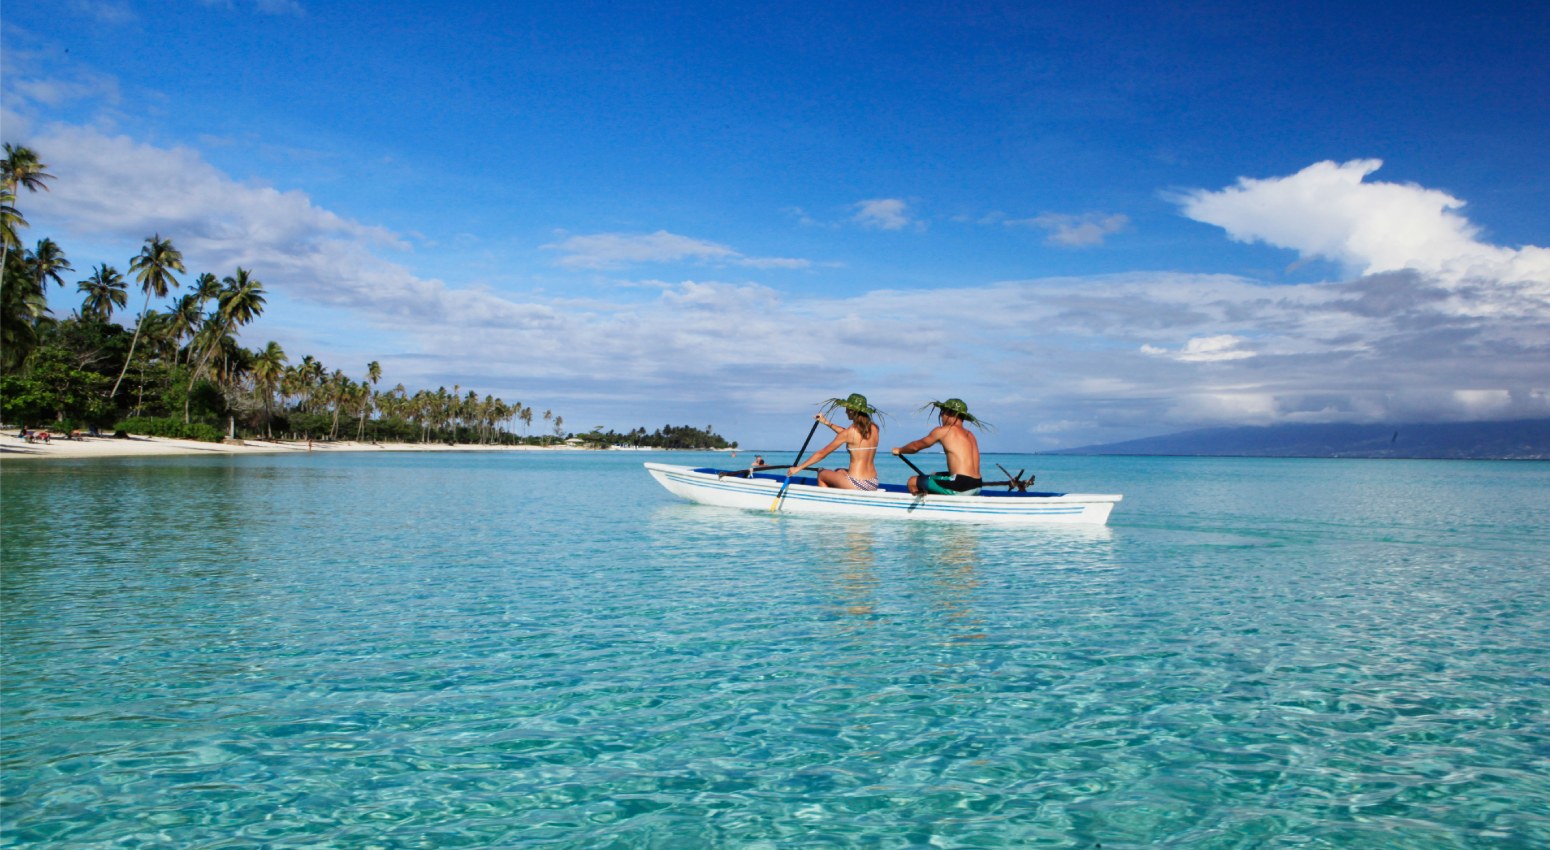 Couple on a small boat on turquoise waters.